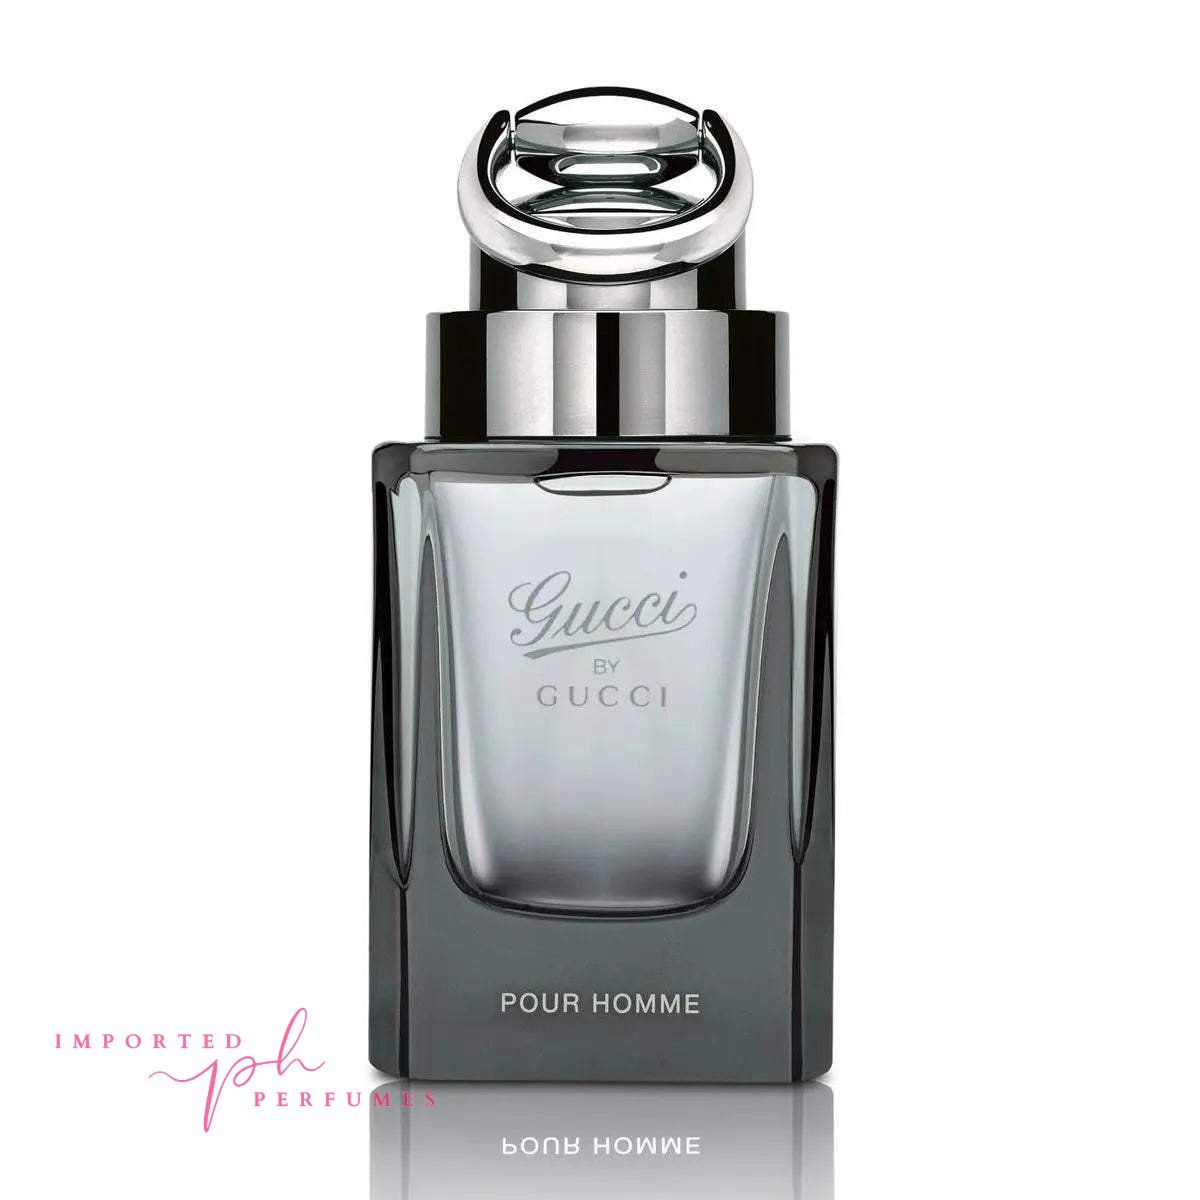 Gucci By Gucci by Gucci for Men Eau De Toilette Spray 90ml-Imported Perfumes Co-Gucci,Gucci by Gucci,men,Pour Homme